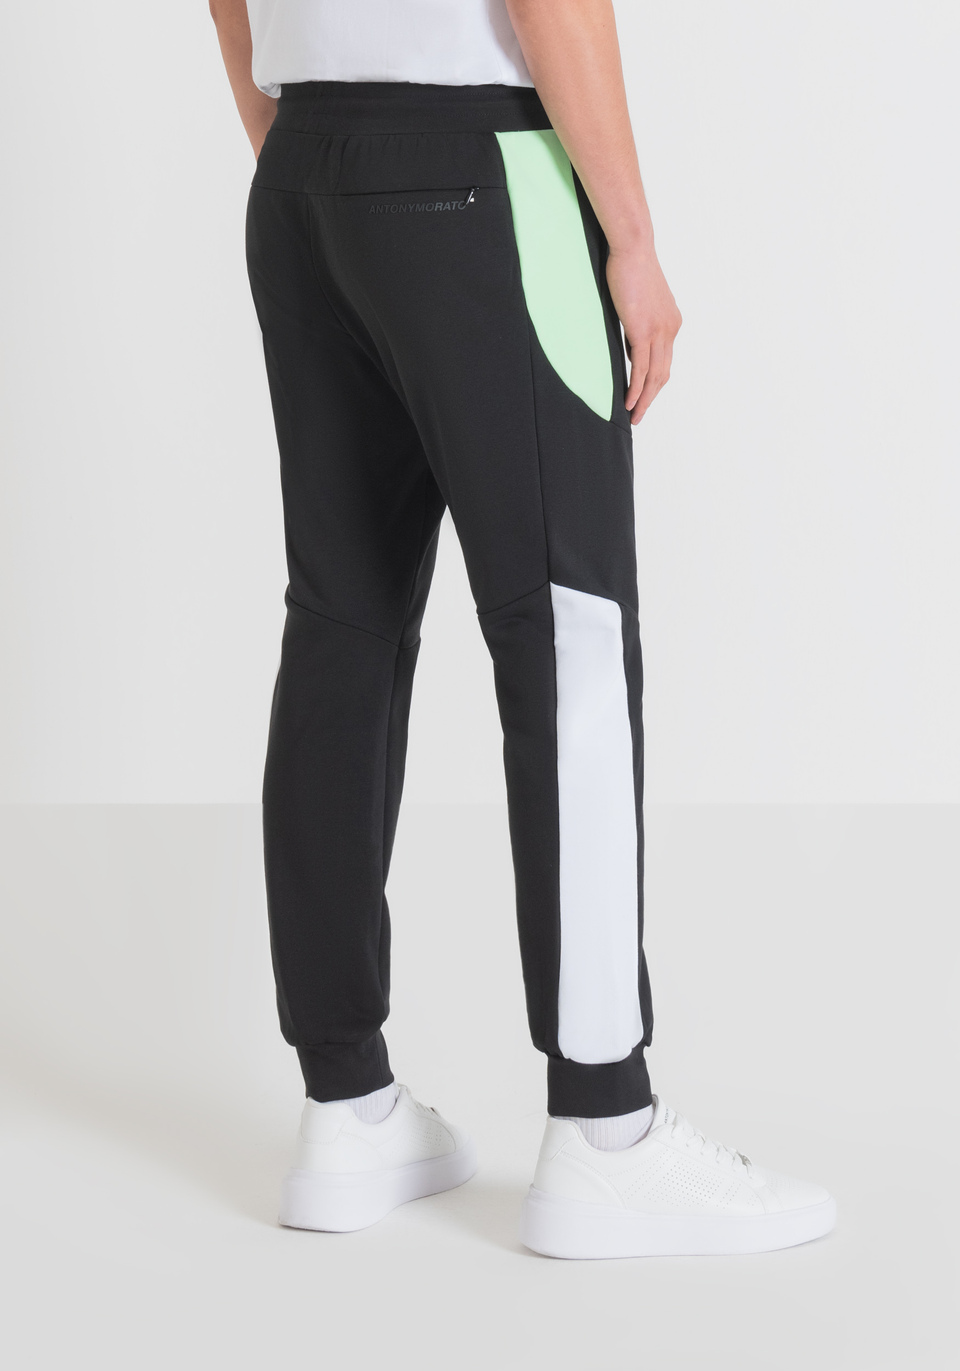 REGULAR FIT TROUSERS IN COTTON BLEND AND SUSTAINABLE POLYESTER - Antony Morato Online Shop